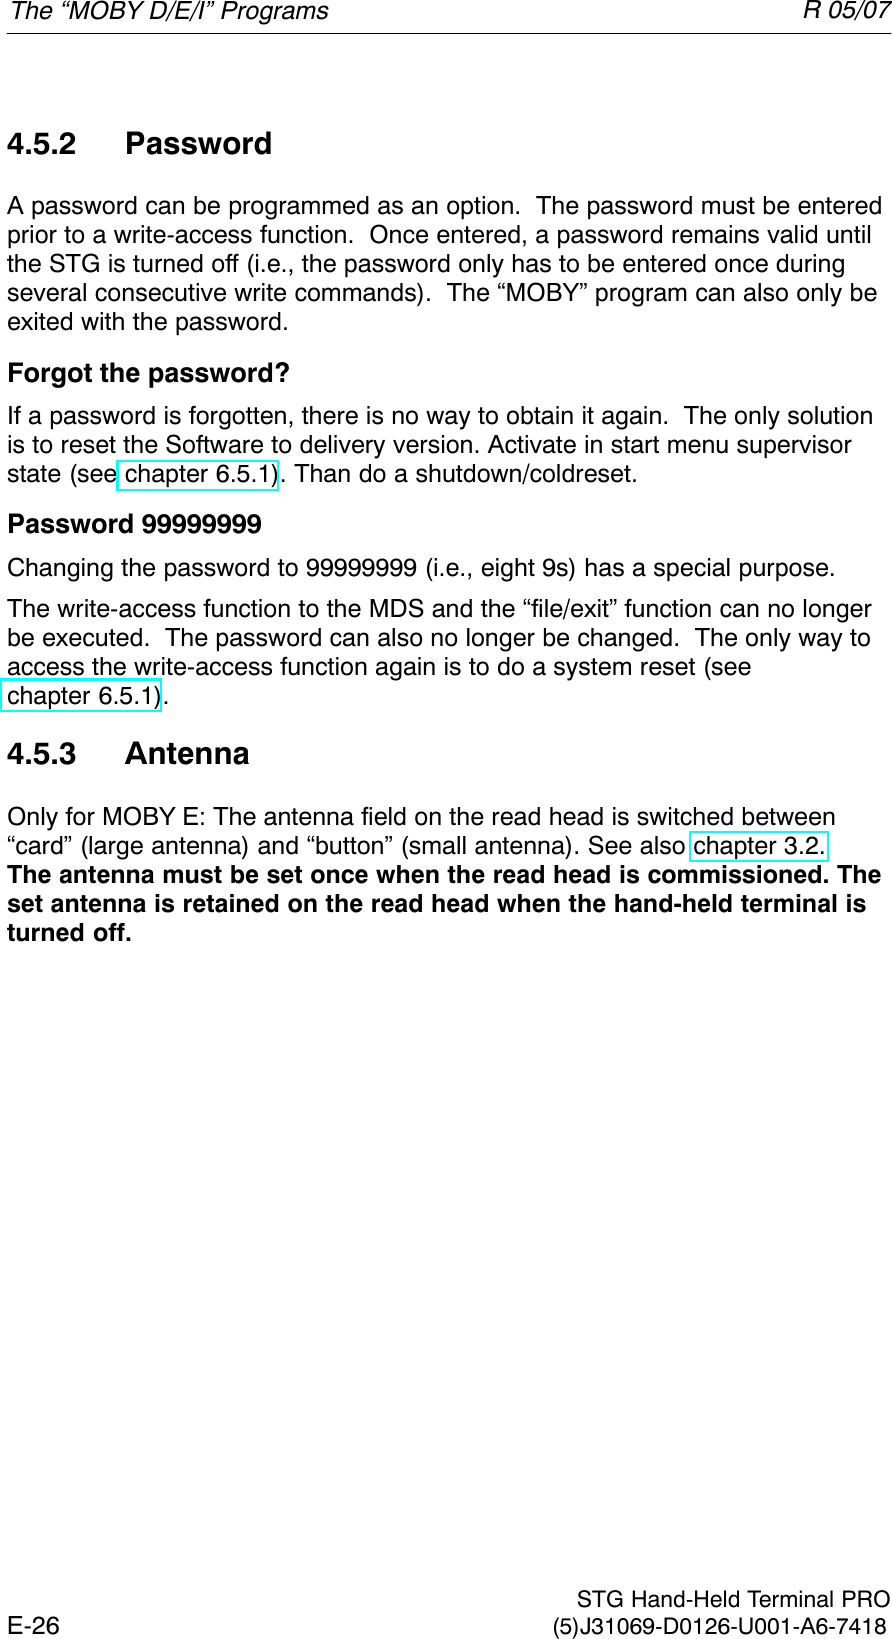 R 05/07E-26  STG Hand-Held Terminal PRO(5)J31069-D0126-U001-A6-74184.5.2 PasswordA password can be programmed as an option.  The password must be enteredprior to a write-access function.  Once entered, a password remains valid untilthe STG is turned off (i.e., the password only has to be entered once duringseveral consecutive write commands).  The “MOBY” program can also only beexited with the password.Forgot the password?If a password is forgotten, there is no way to obtain it again.  The only solutionis to reset the Software to delivery version. Activate in start menu supervisorstate (see chapter 6.5.1). Than do a shutdown/coldreset.Password 99999999Changing the password to 99999999 (i.e., eight 9s) has a special purpose.The write-access function to the MDS and the “file/exit” function can no longerbe executed.  The password can also no longer be changed.  The only way toaccess the write-access function again is to do a system reset (seechapter 6.5.1).4.5.3 AntennaOnly for MOBY E: The antenna field on the read head is switched between“card” (large antenna) and “button” (small antenna). See also chapter 3.2.The antenna must be set once when the read head is commissioned. Theset antenna is retained on the read head when the hand-held terminal isturned off.The “MOBY D/E/I” Programs